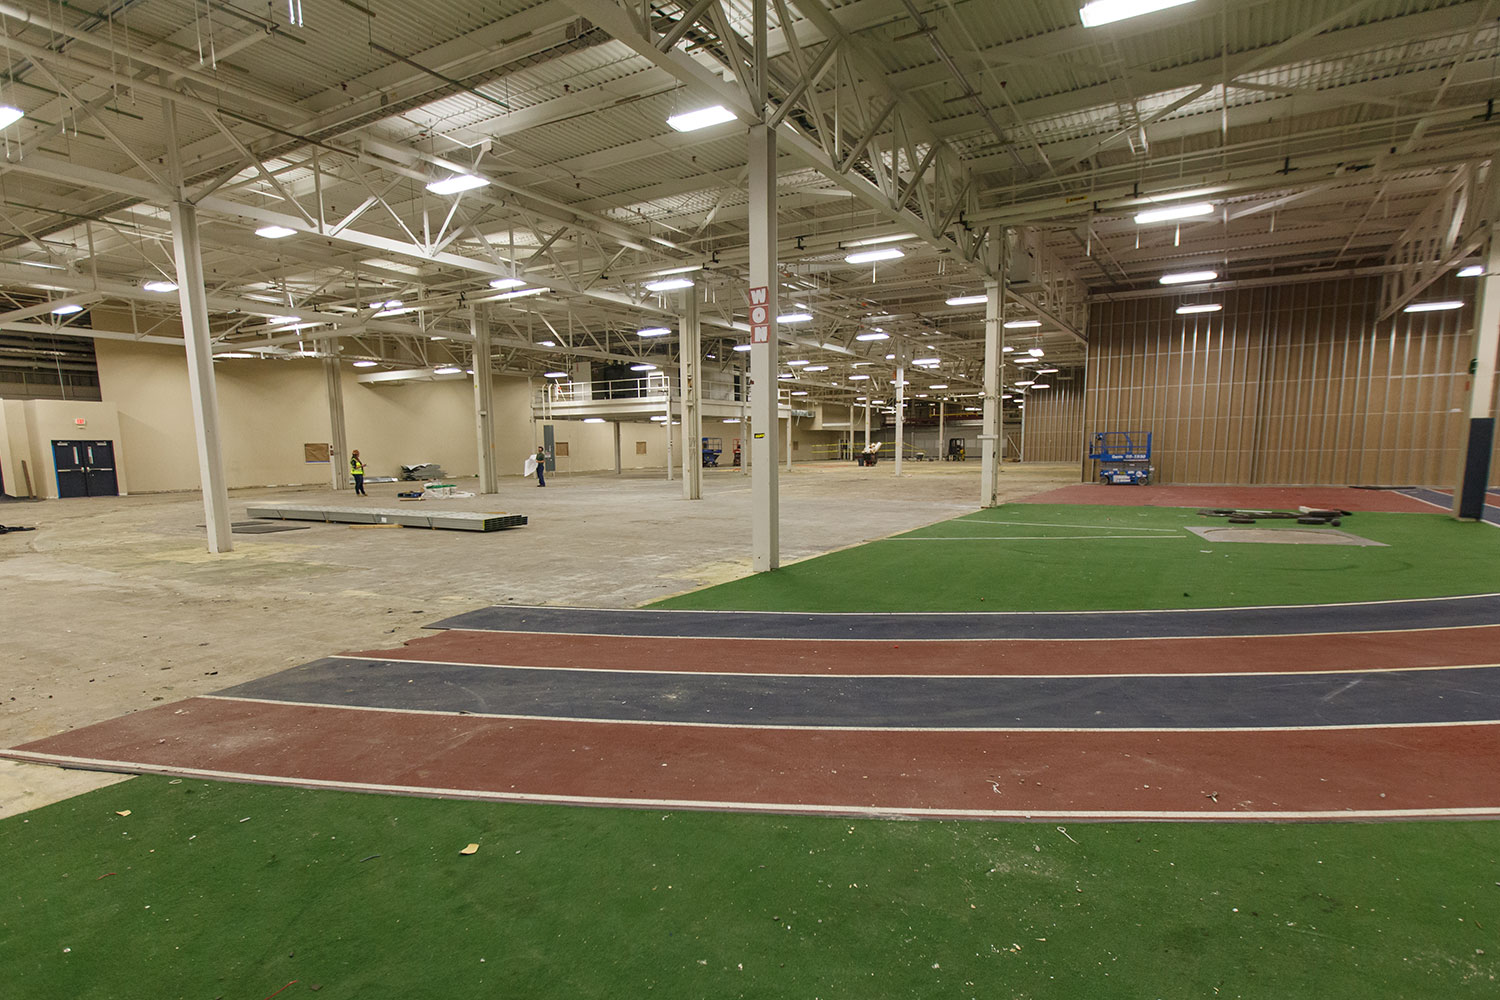 Over the summer, Liberty will continue to convert the former Tolsma Indoor Track in Marie F. Green Hall into administrative and academic space for the School of Communication & Creative Arts.